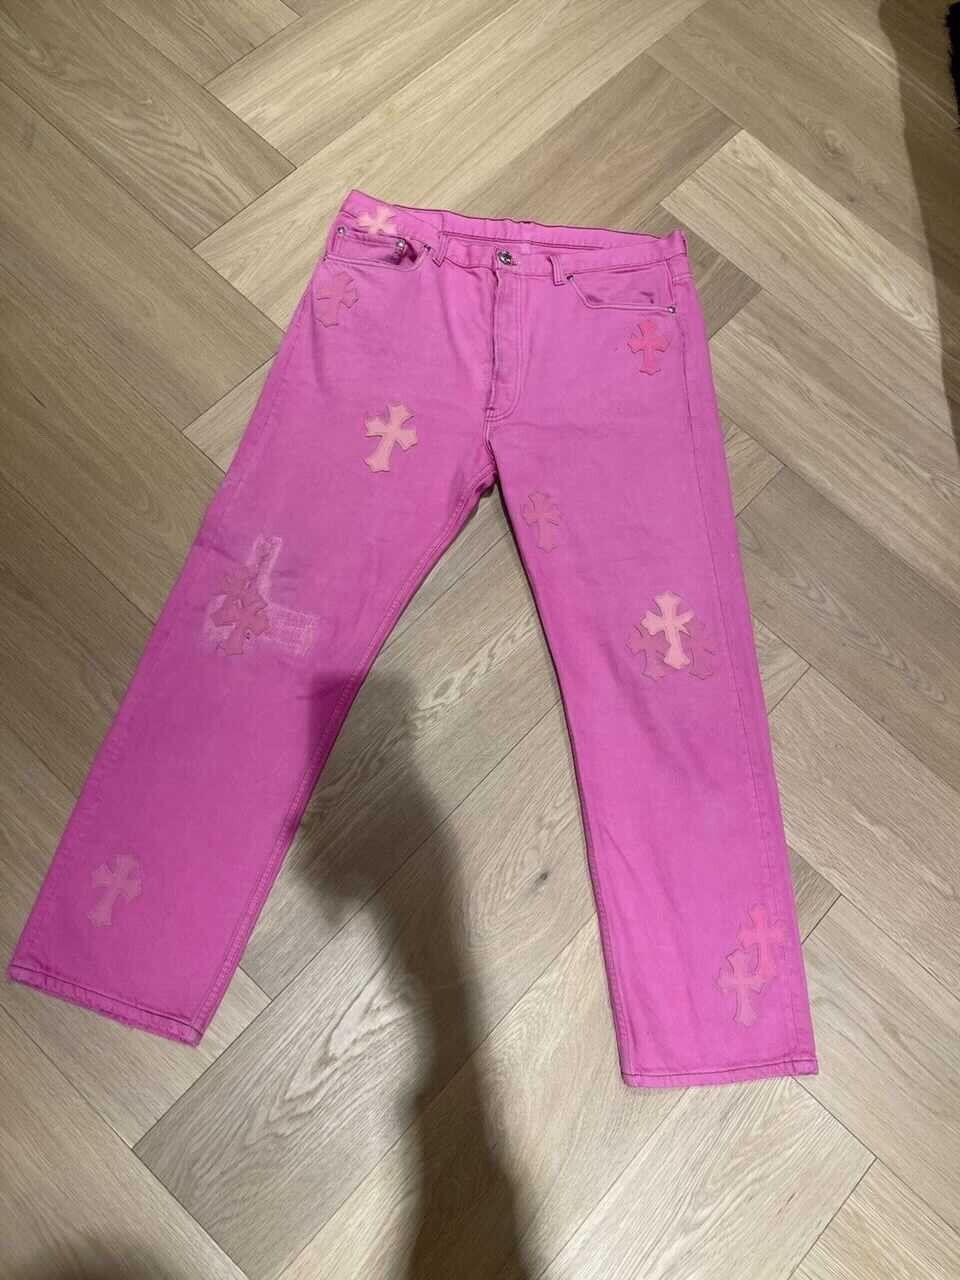 CHROME HEARTS Blue Jeans With Pink Crosses – PENGUIN